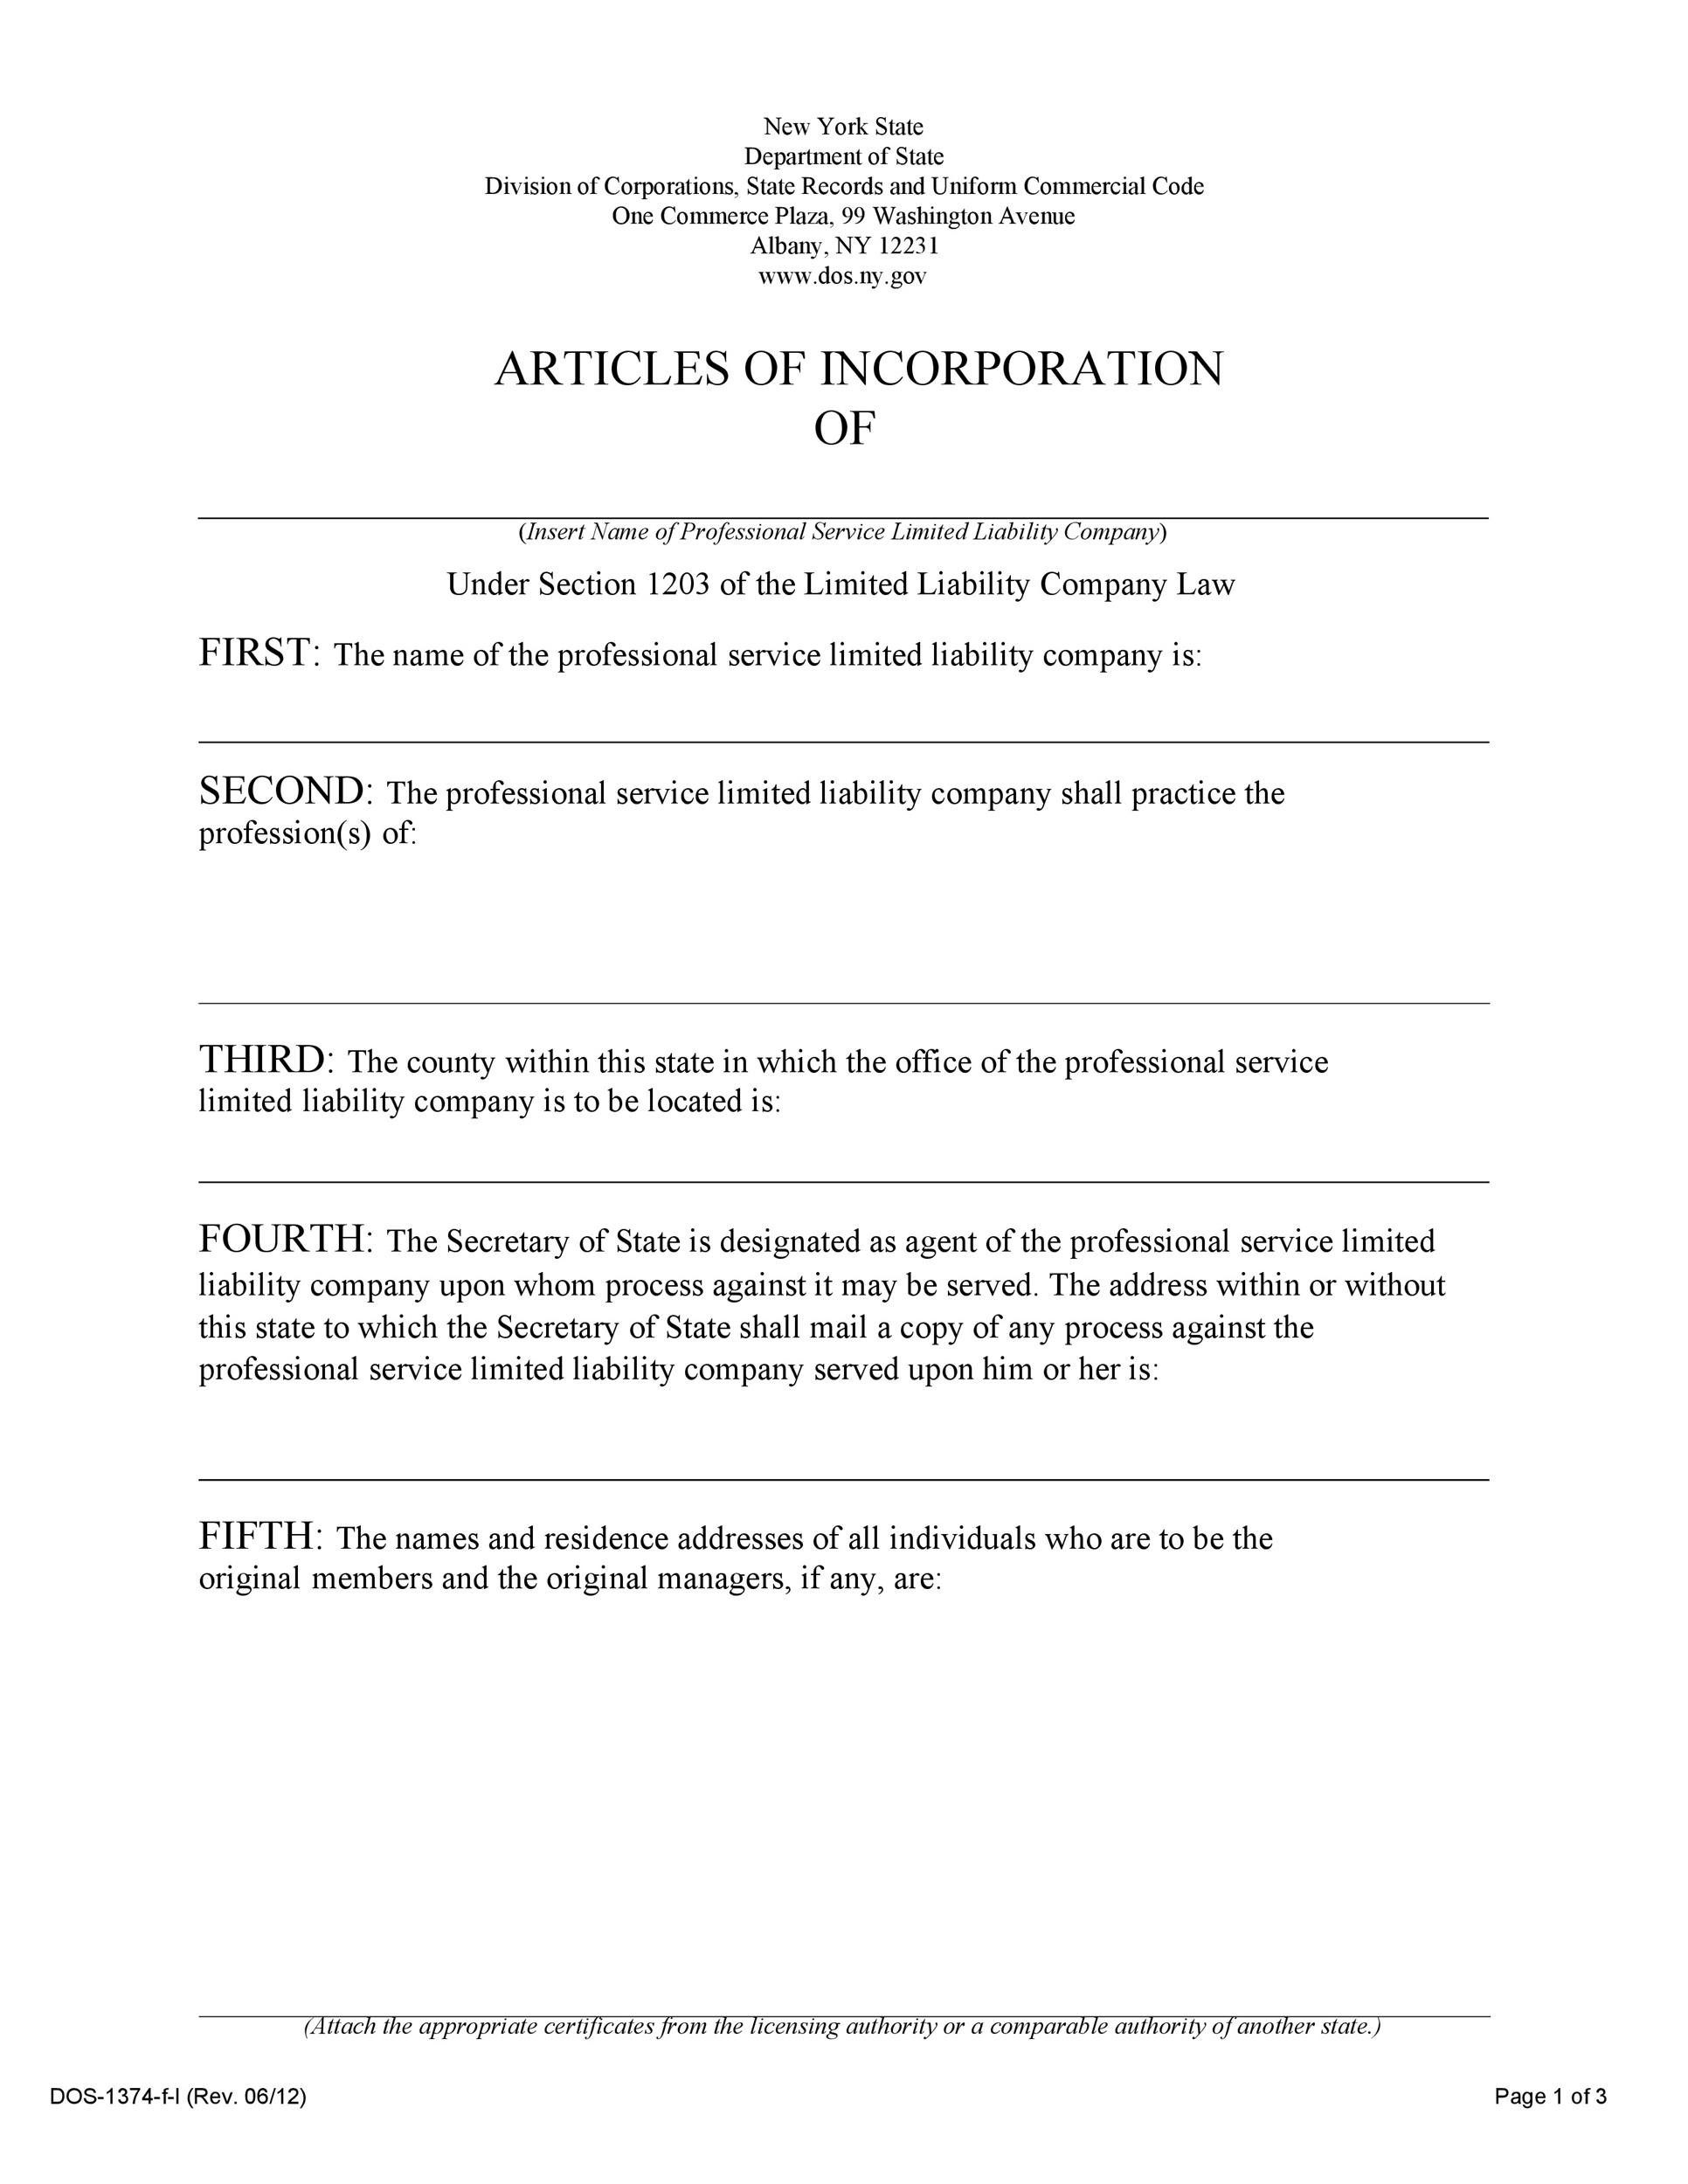 Articles of Incorporation 47 Templates for Any State ᐅ TemplateLab